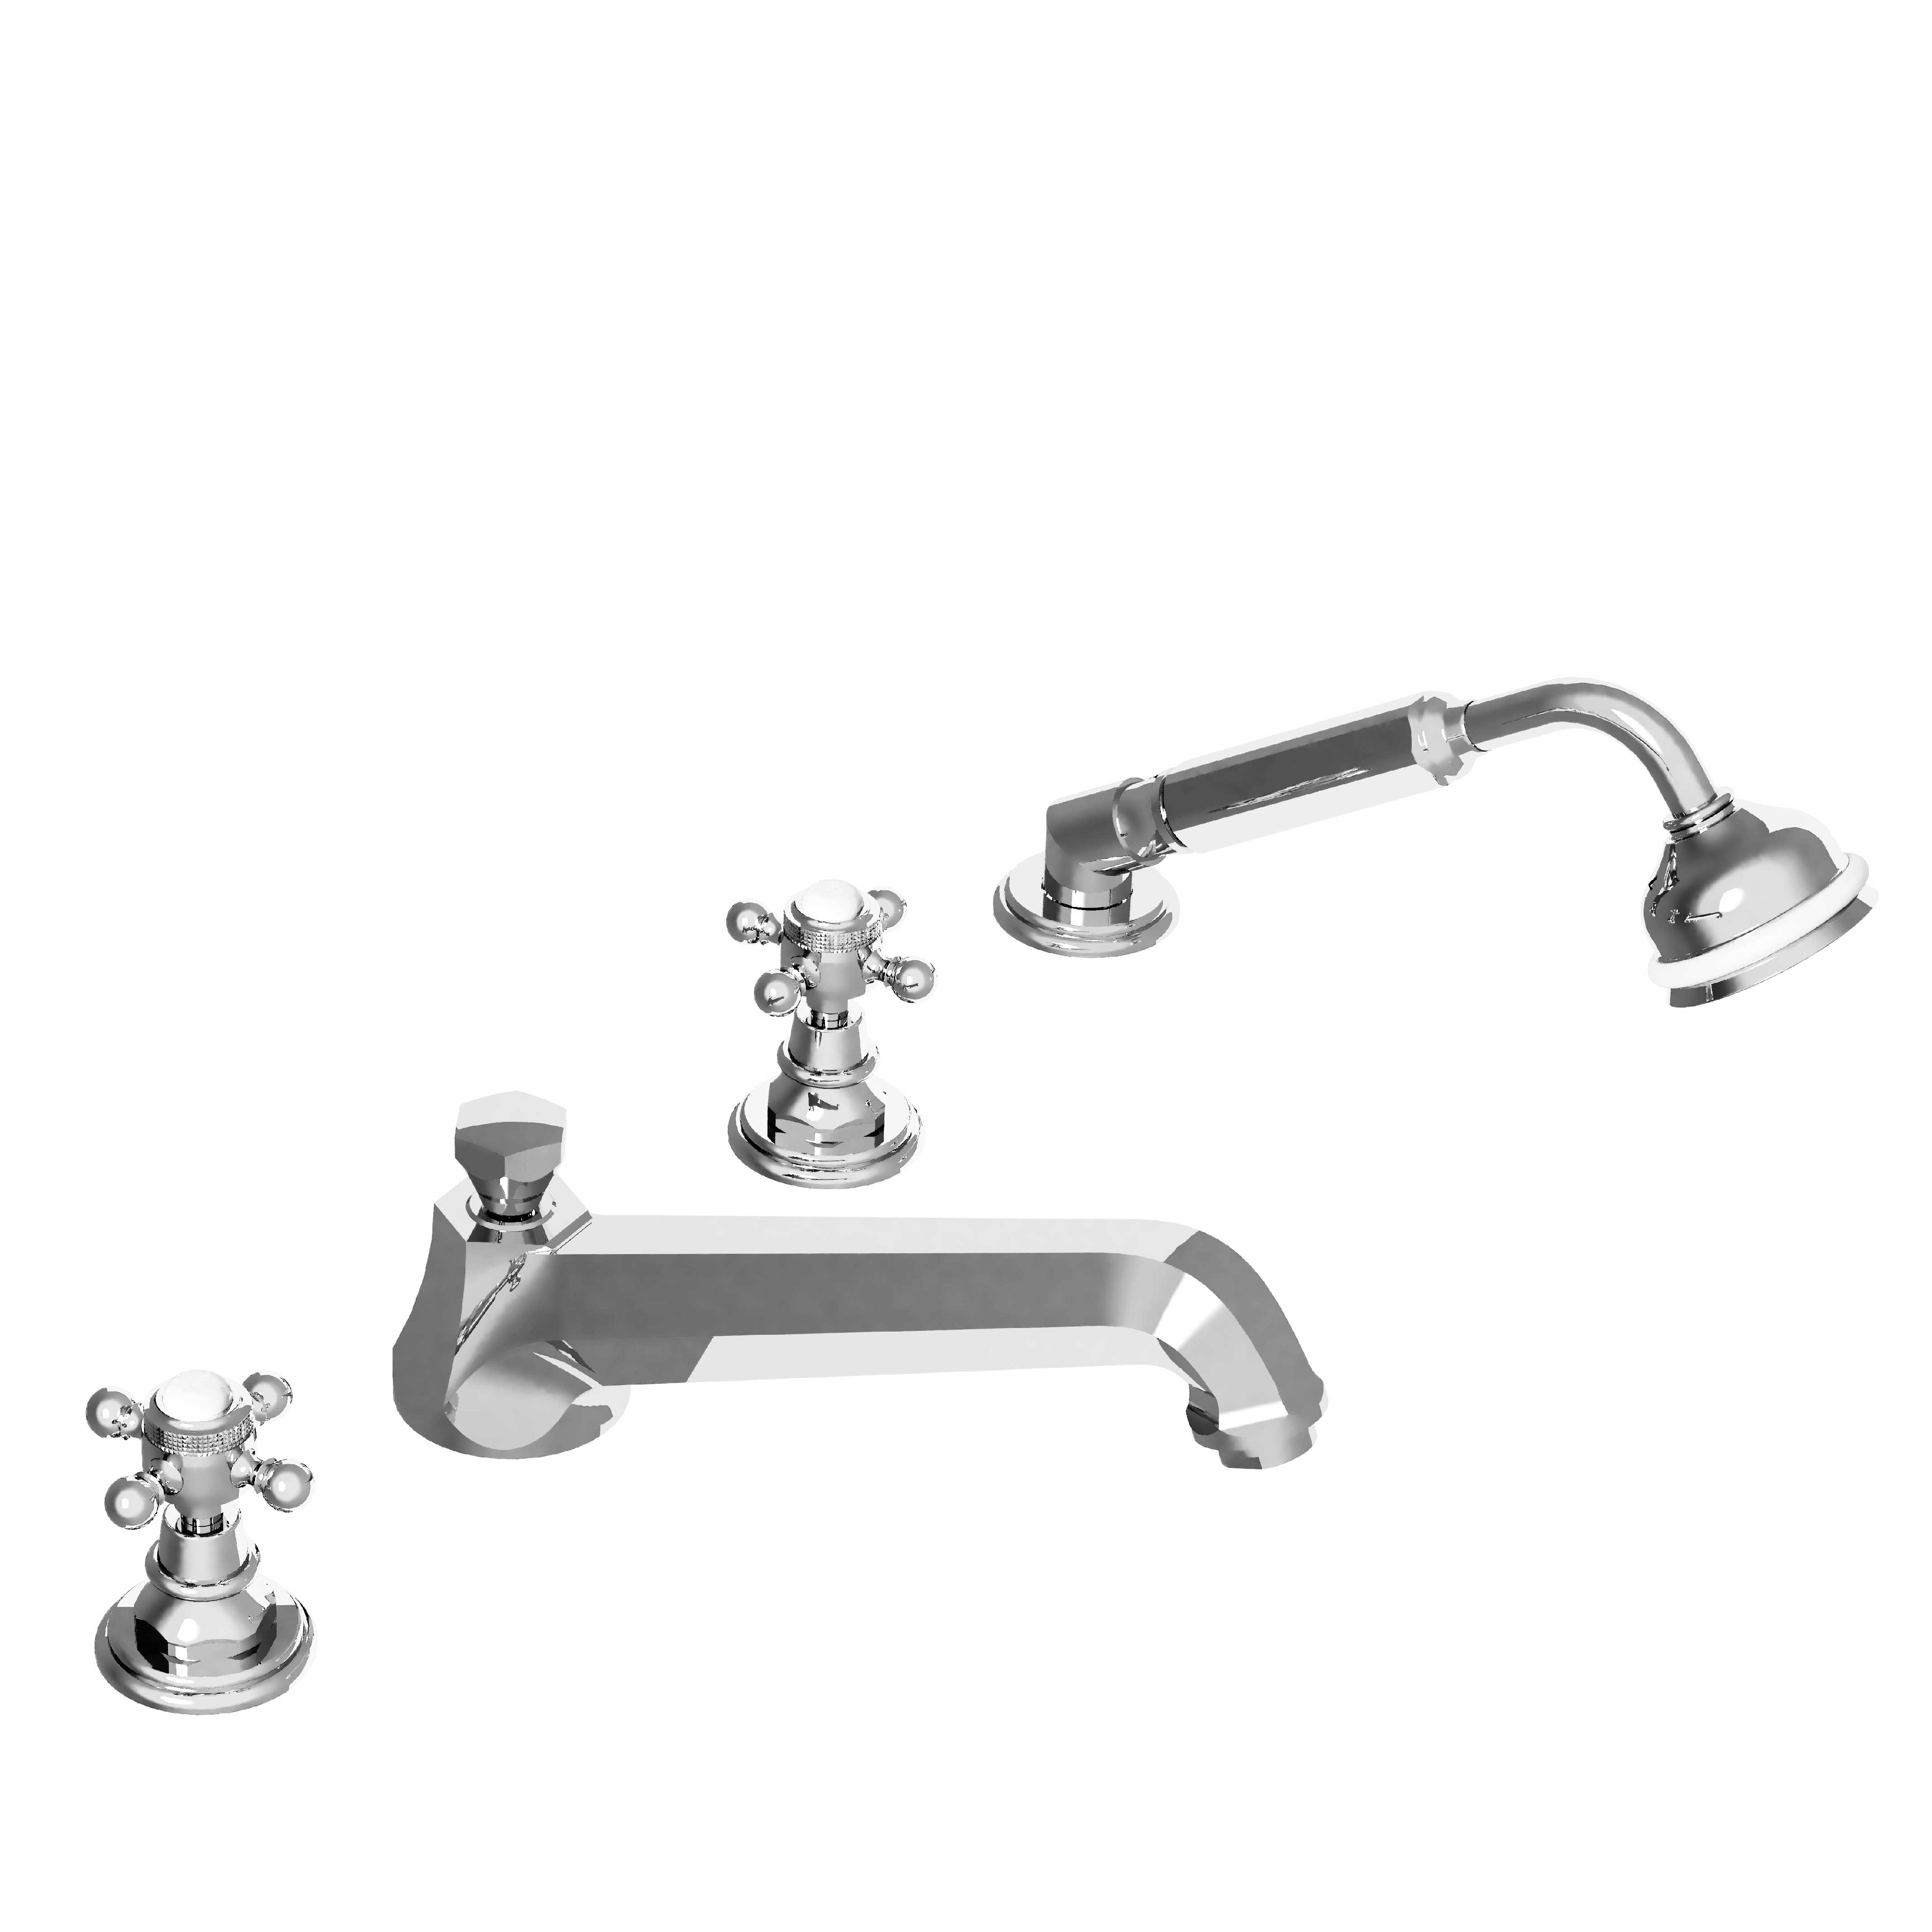 M30-3304 4-hole bath and shower mixer